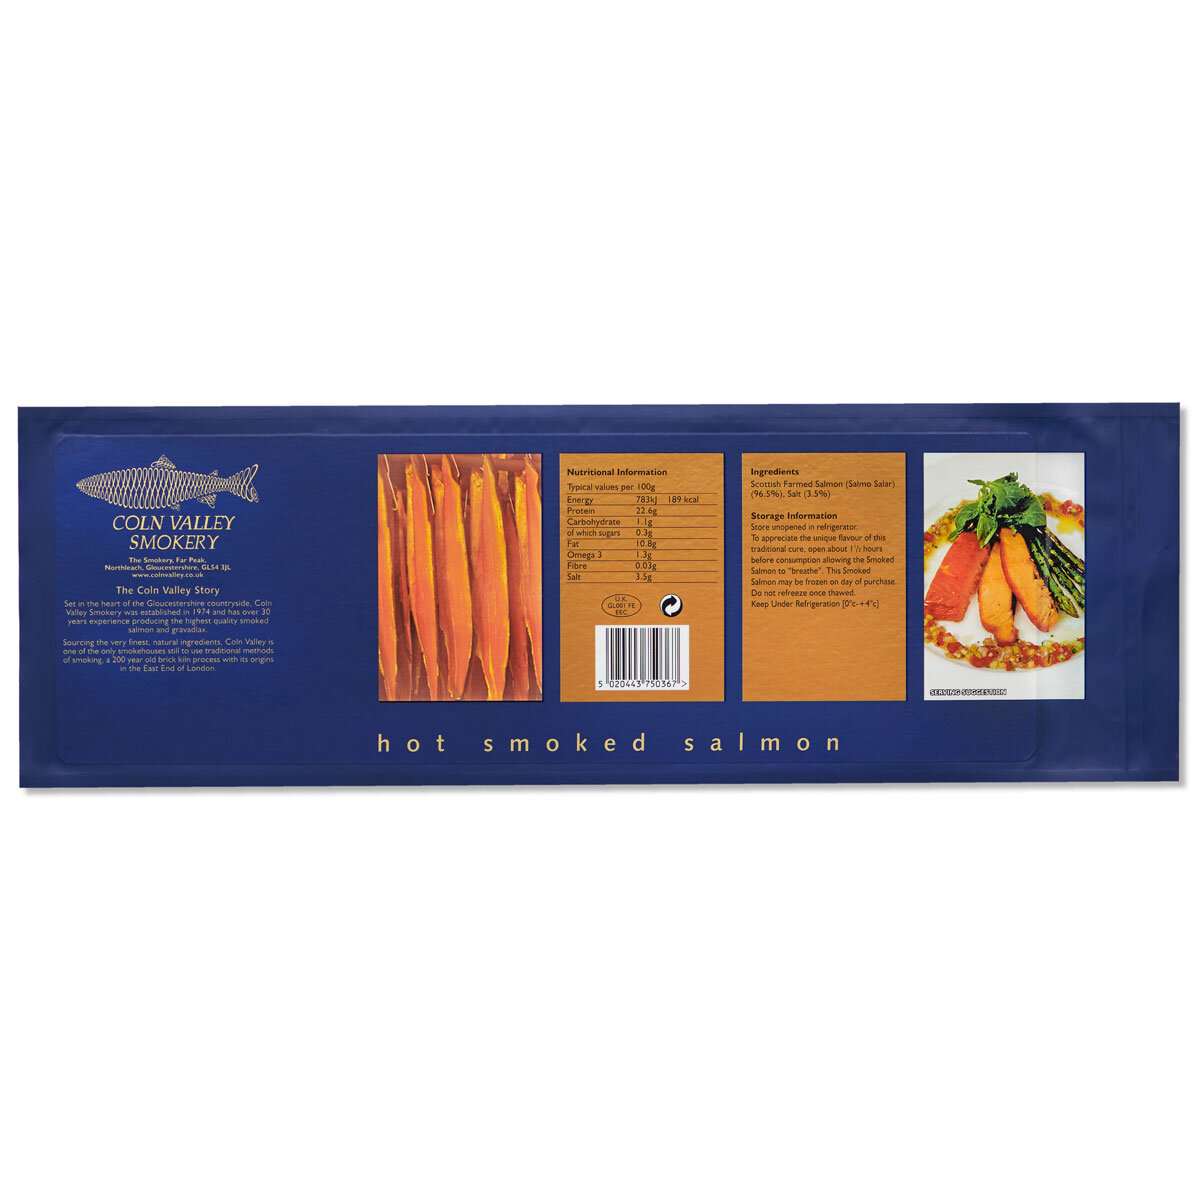 Coln Valley Kiln Roasted Salmon, 800g (Serves 6-8 people)